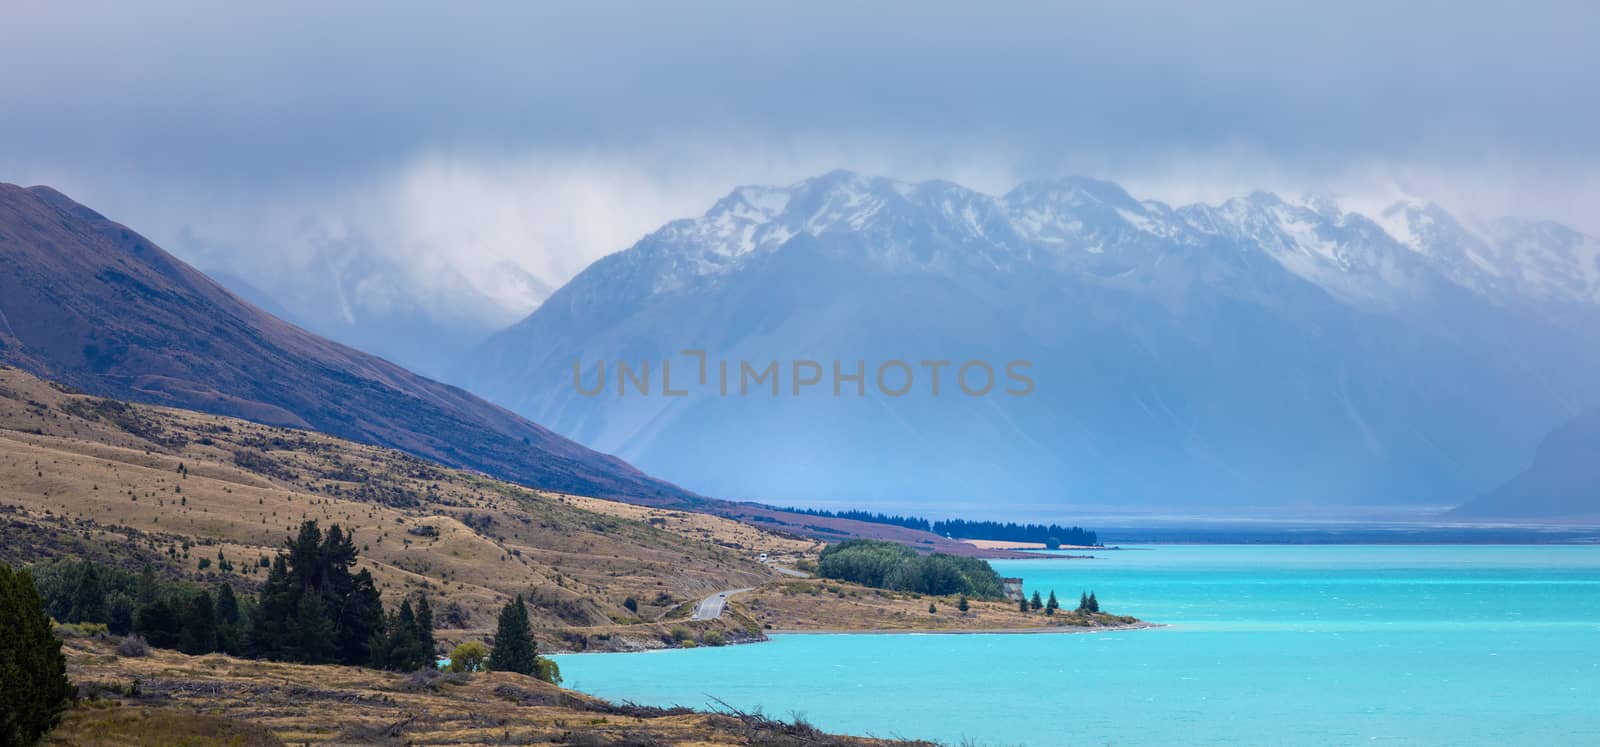 An image of the turquoise Lake Pukaki in New Zealand